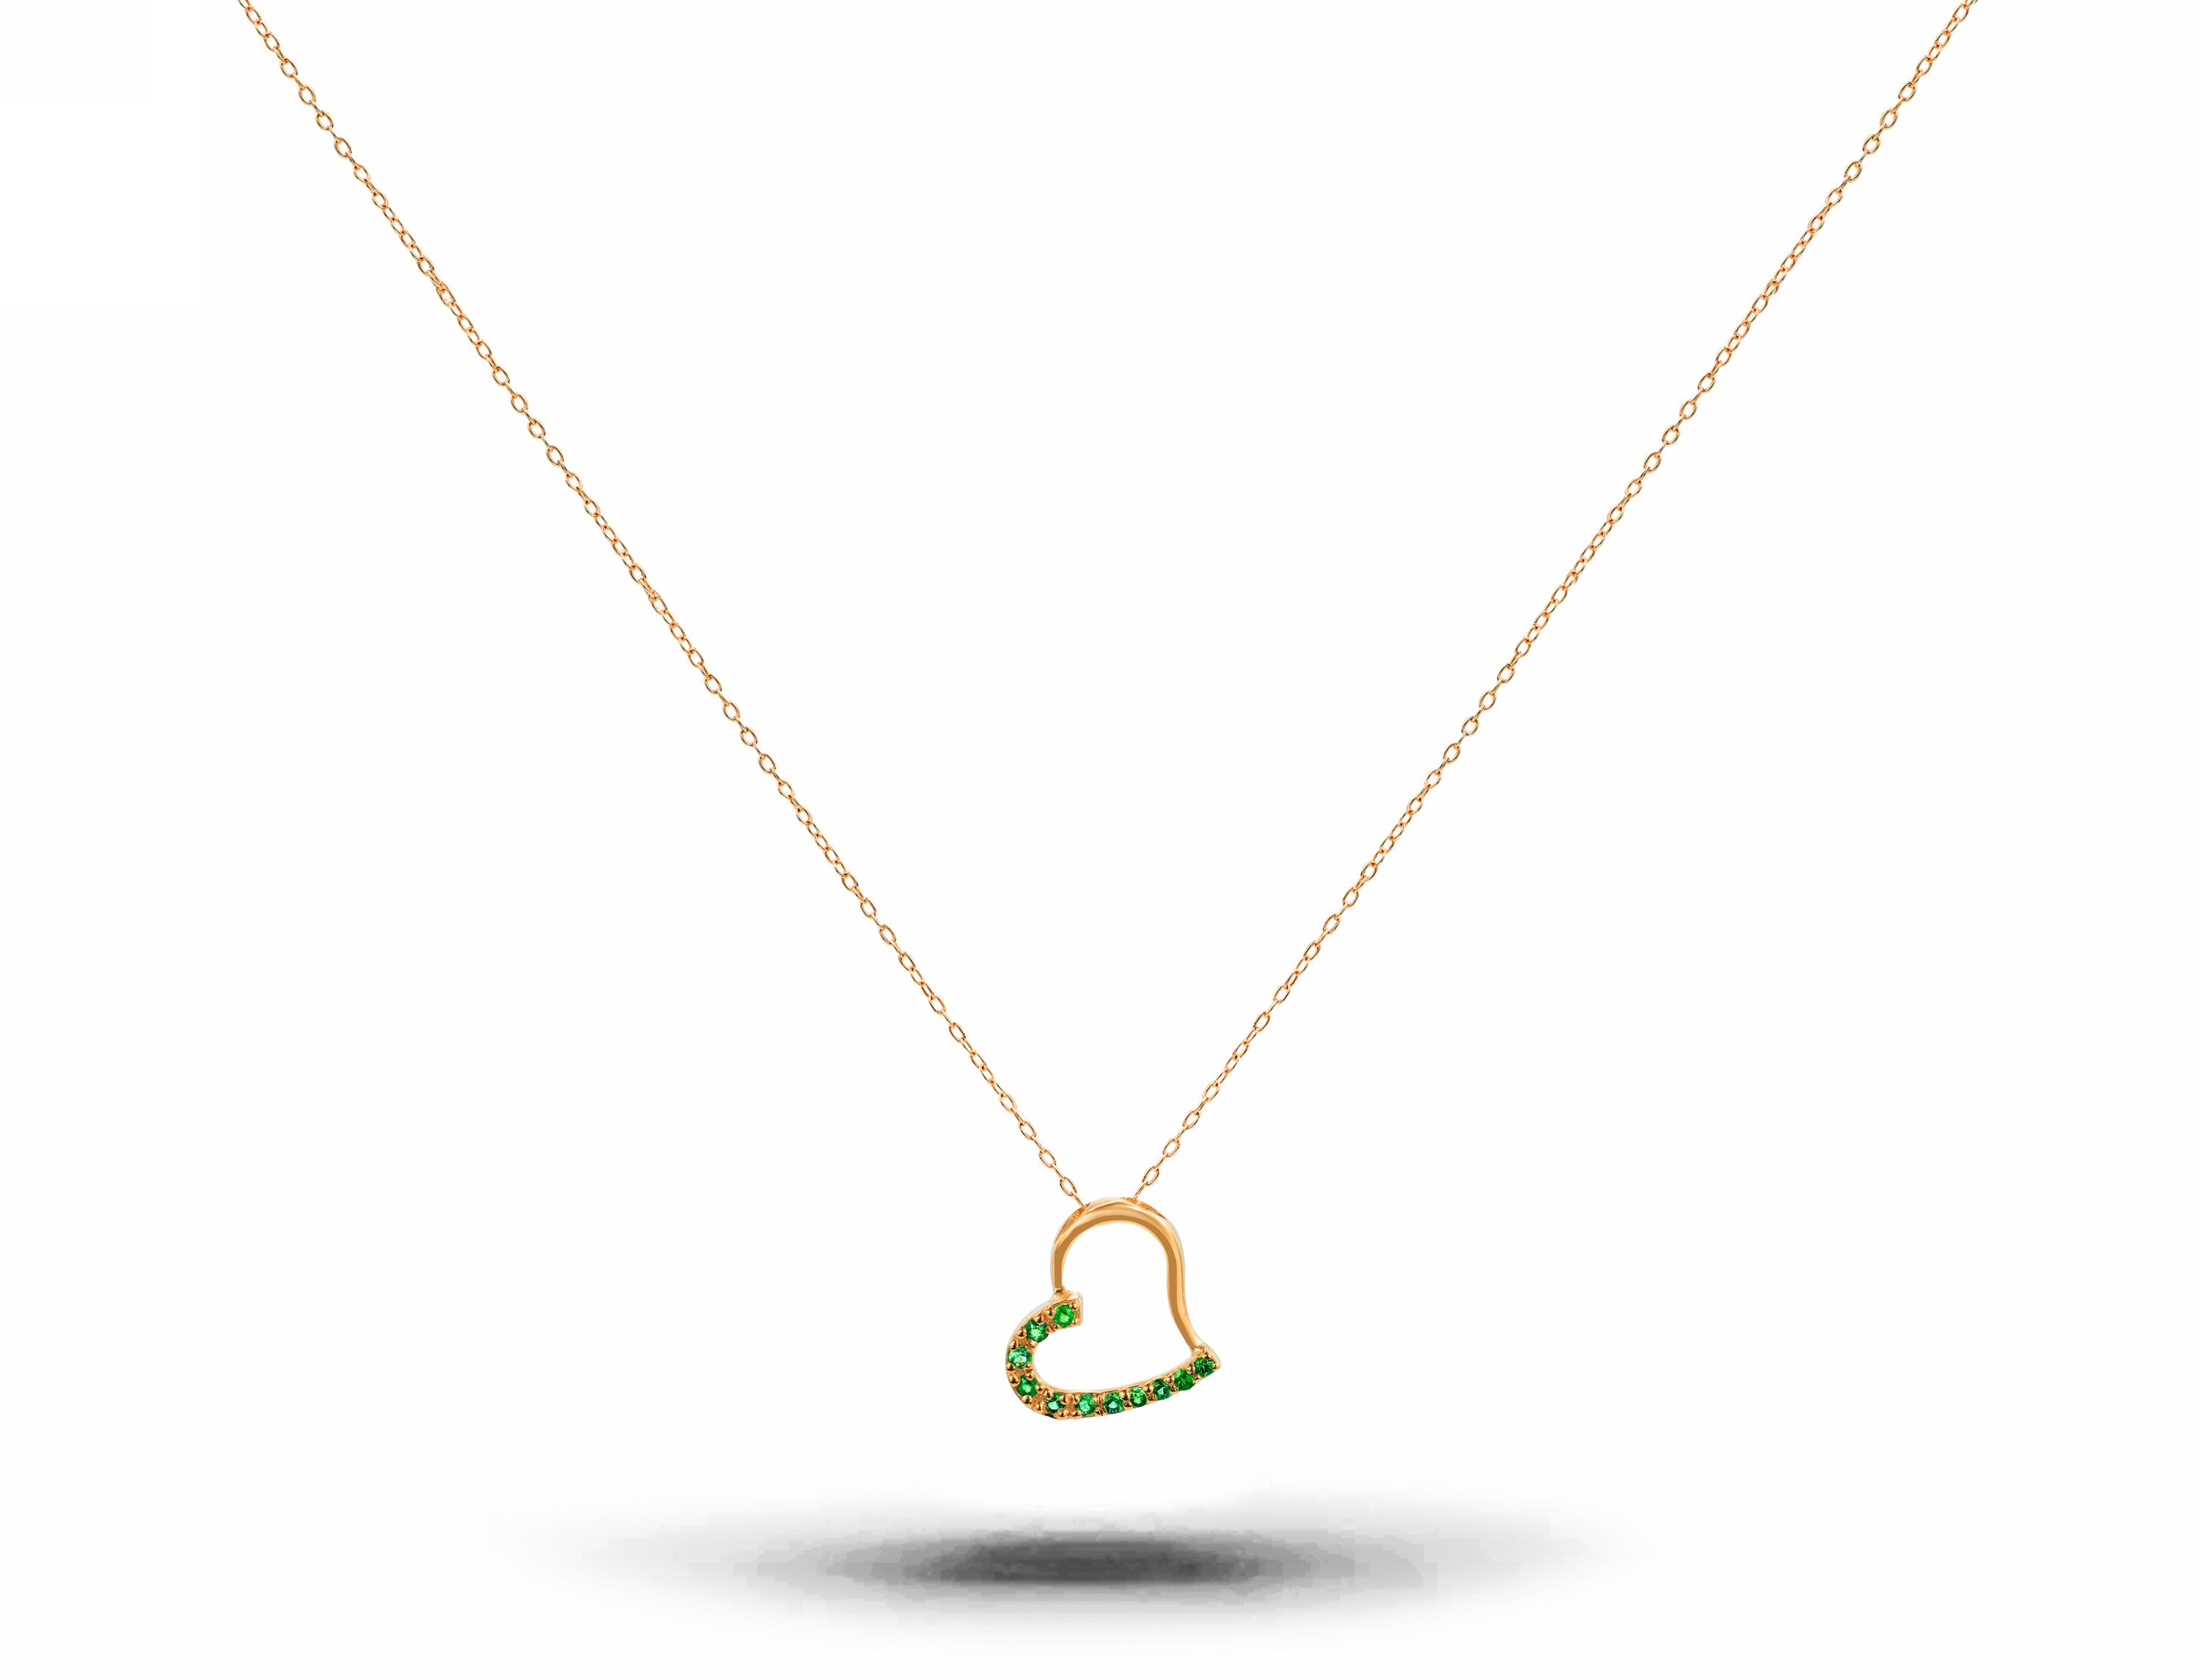 Valentine Jewelry 14k Gold Necklace  Emerald Heart Necklace Delicate Heart Charm Necklace Christmas Gift Natural Emerald May Birthstone  Minimalist.

Beautiful little Minimalist Necklace is made of either 14k Gold adorned with natural AAA quality